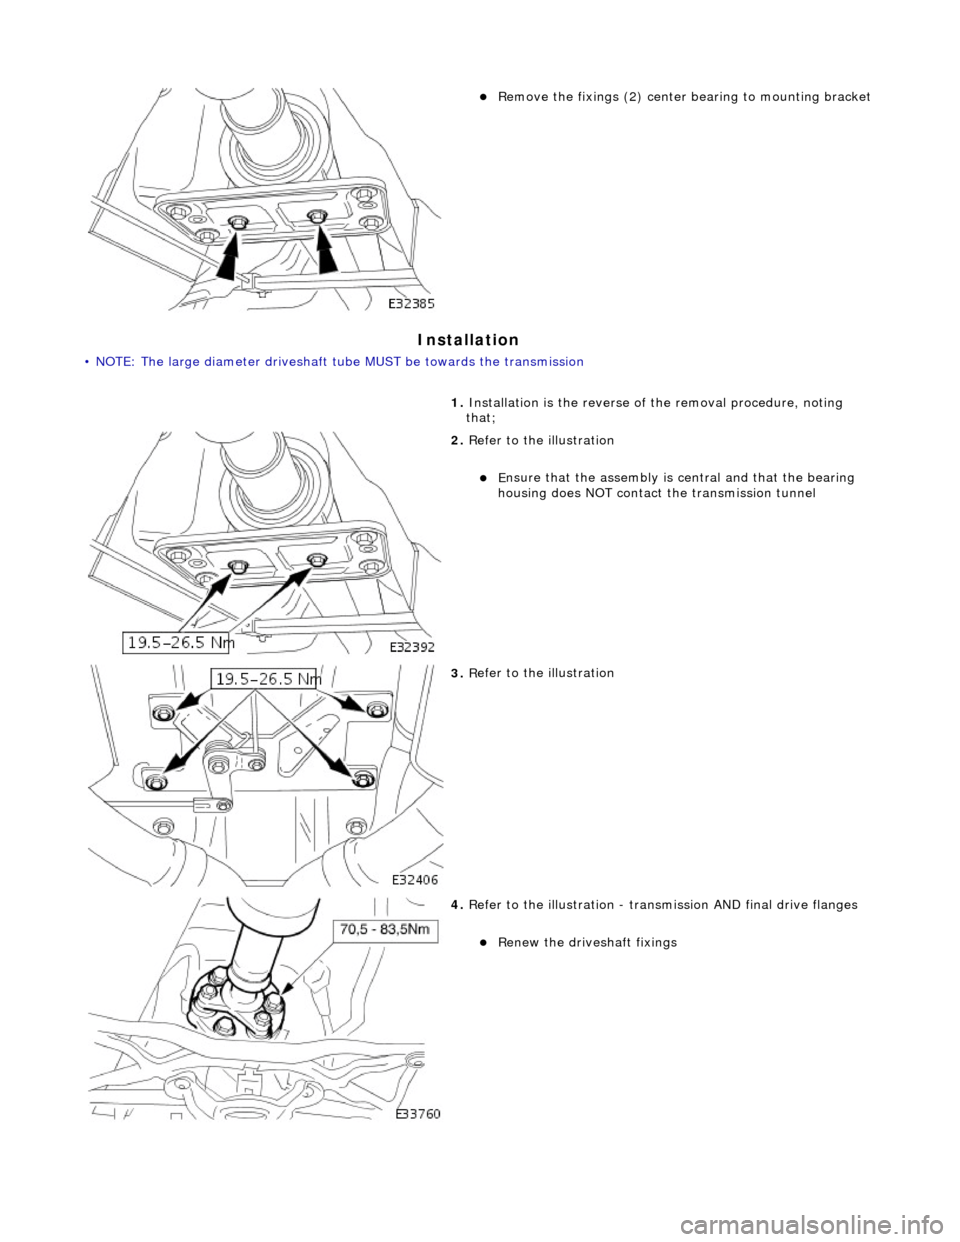 JAGUAR X308 1998 2.G Workshop Manual I
nstallation 
• 
NOTE: The large diameter driveshaft tu
be MUST be towards the transmission  
R
 emove the fixings (2) center
 bearing to mounting bracket  
1.  Installation is the  reverse of t